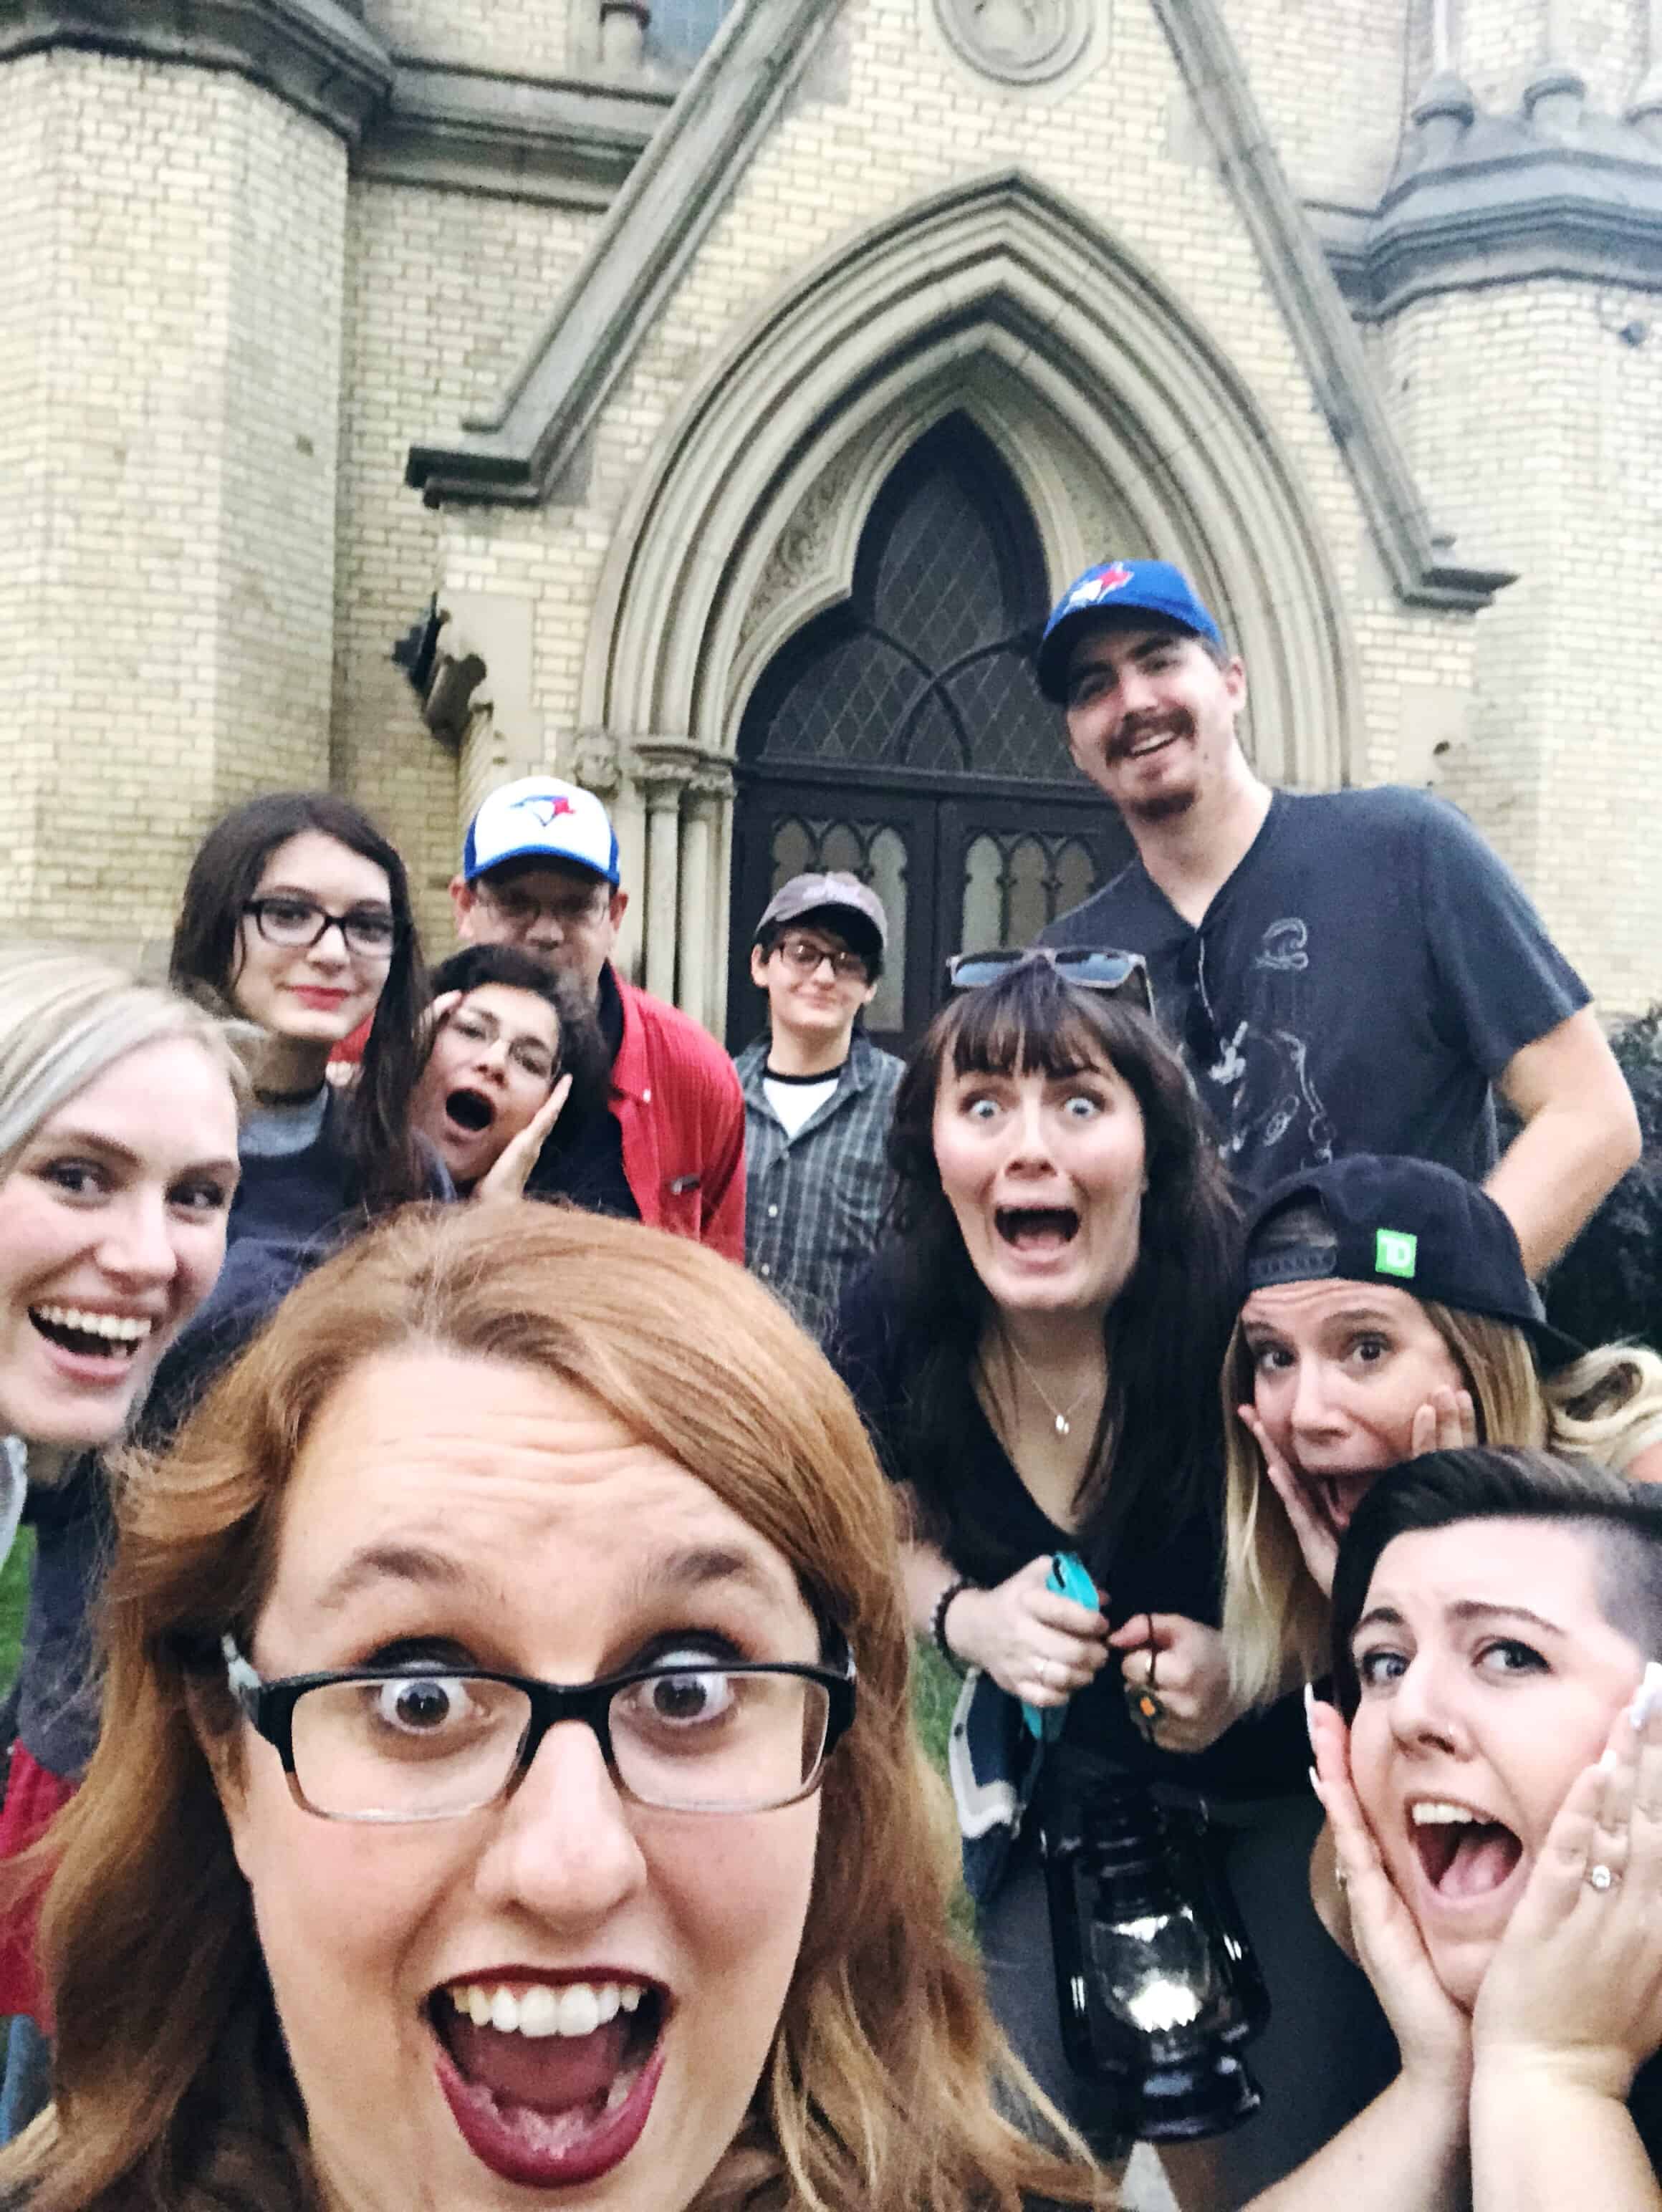 A selfie of 9 people in front of a church